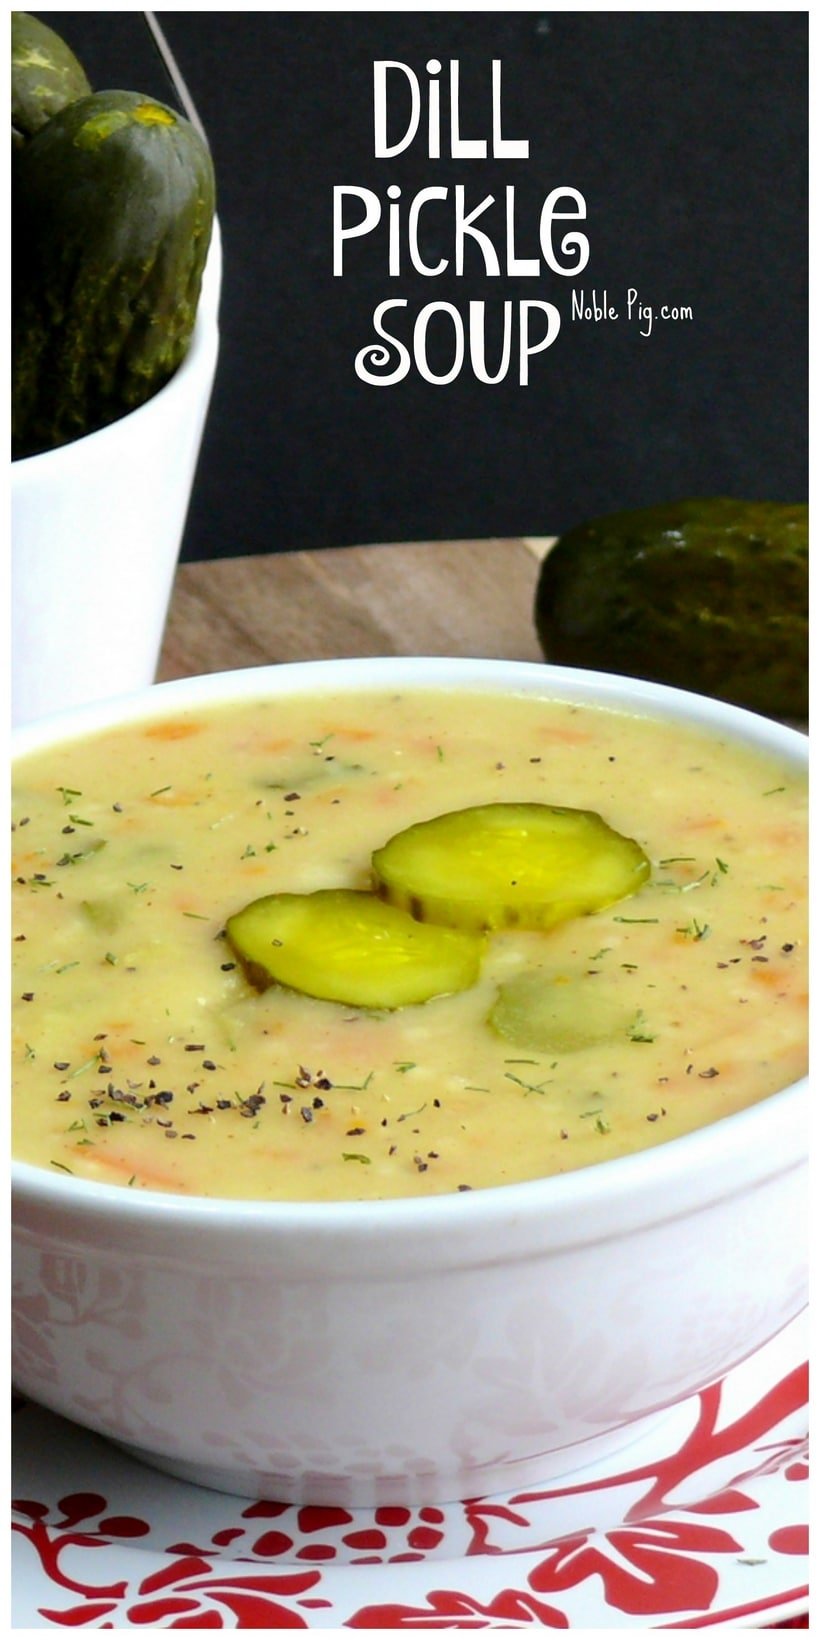 VIDEO + Recipe: Dill Pickle Soup has swept the nation and is exactly the Polish Dill Pickle Soup recipe you've been looking for. #noblepig #dillpicklesoup #polishdillpicklesoup #pickles #dill #soup #polishfood #polishfoodrecipes #polishrecipes #thebestdillpicklesoup #easydillpicklesoup #dillpickles #dillpickle via @cmpollak1